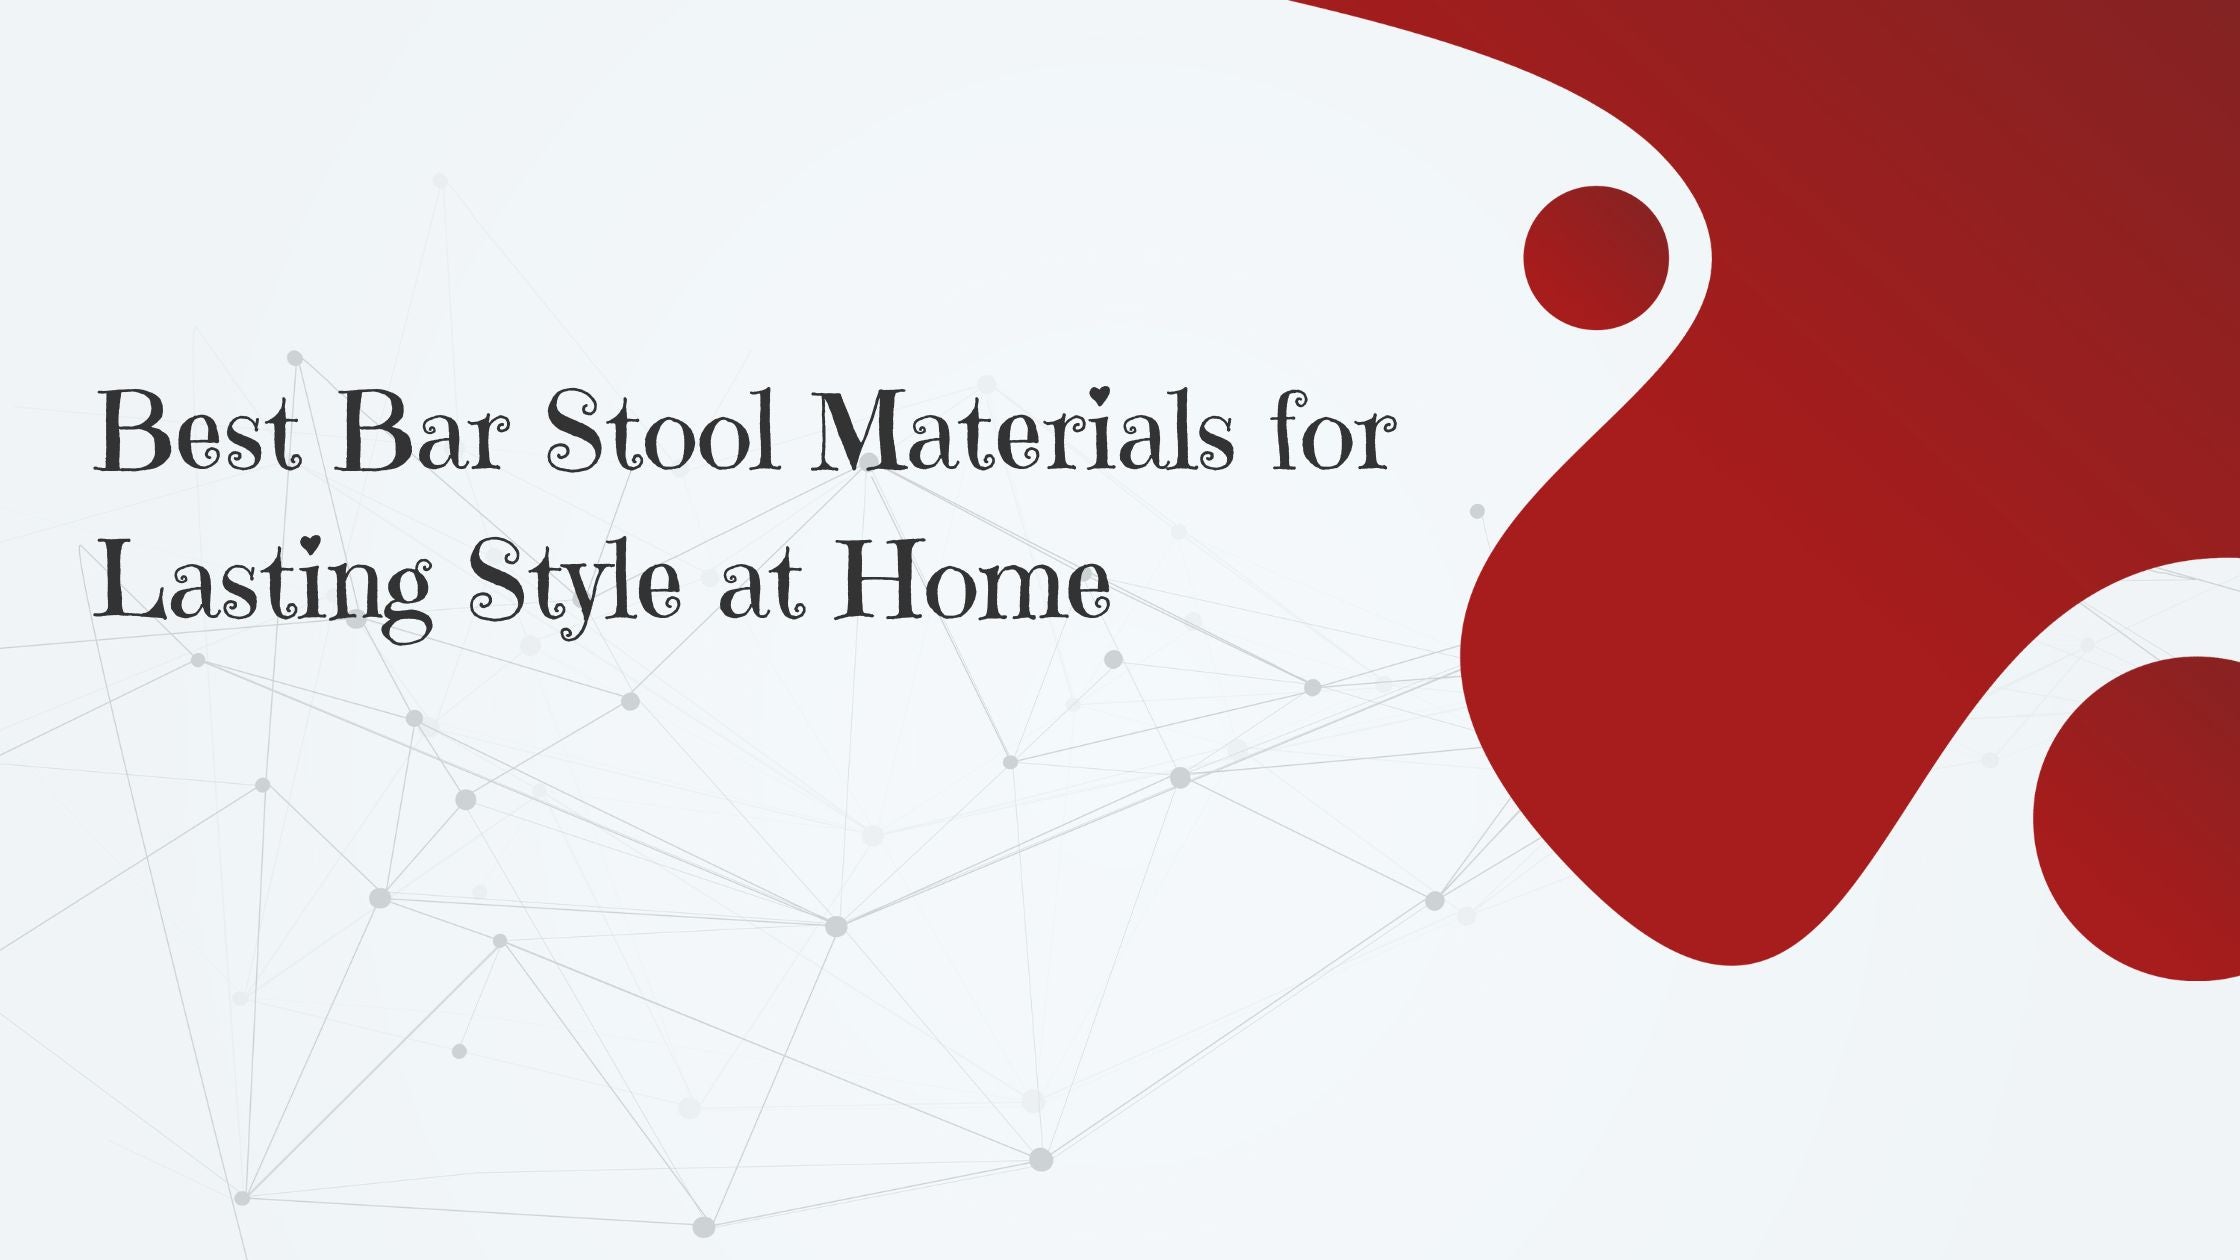 Best Bar Stool Materials for Lasting Style at Home